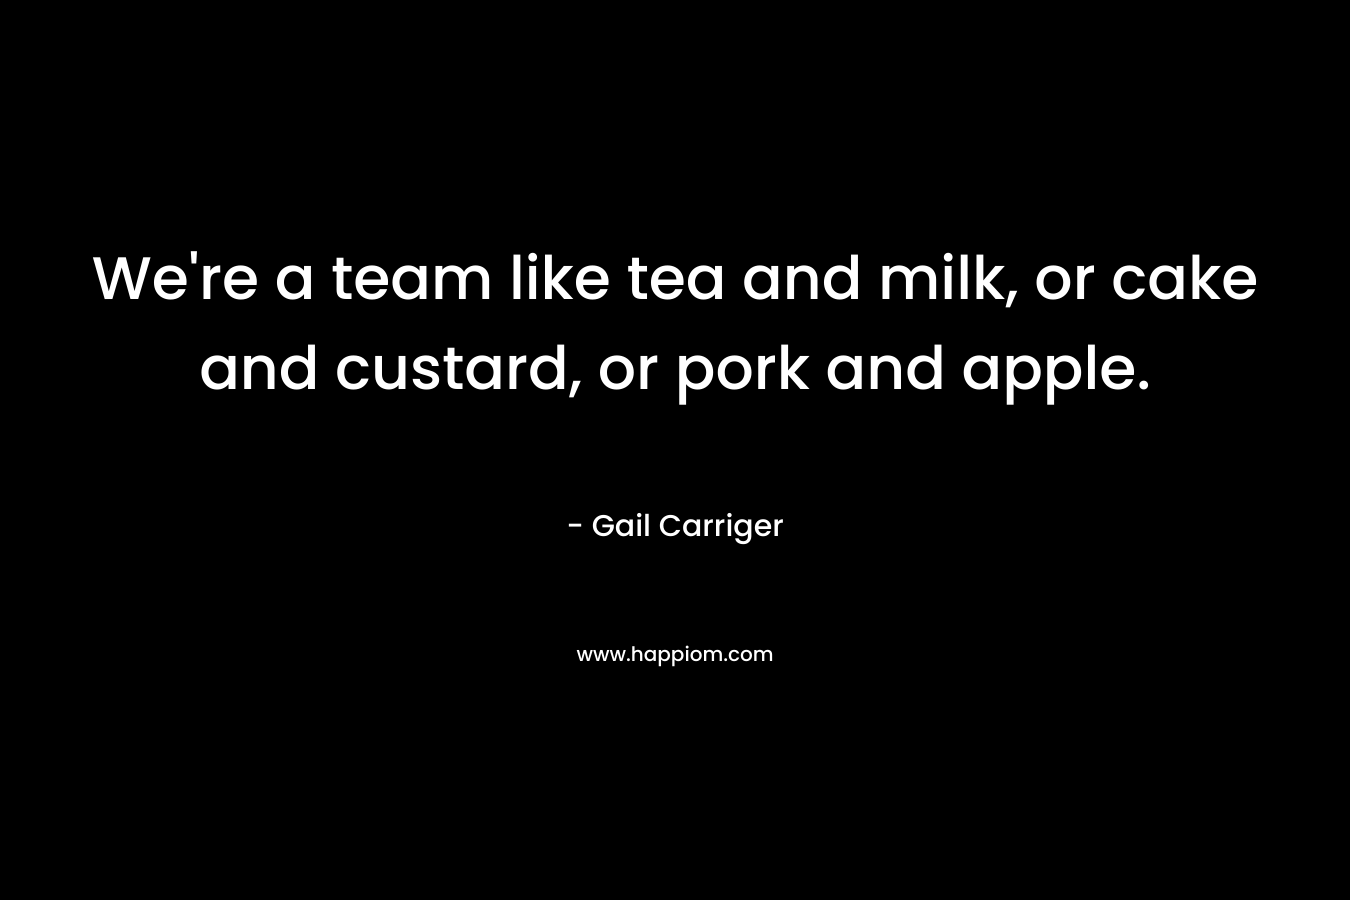 We’re a team like tea and milk, or cake and custard, or pork and apple. – Gail Carriger